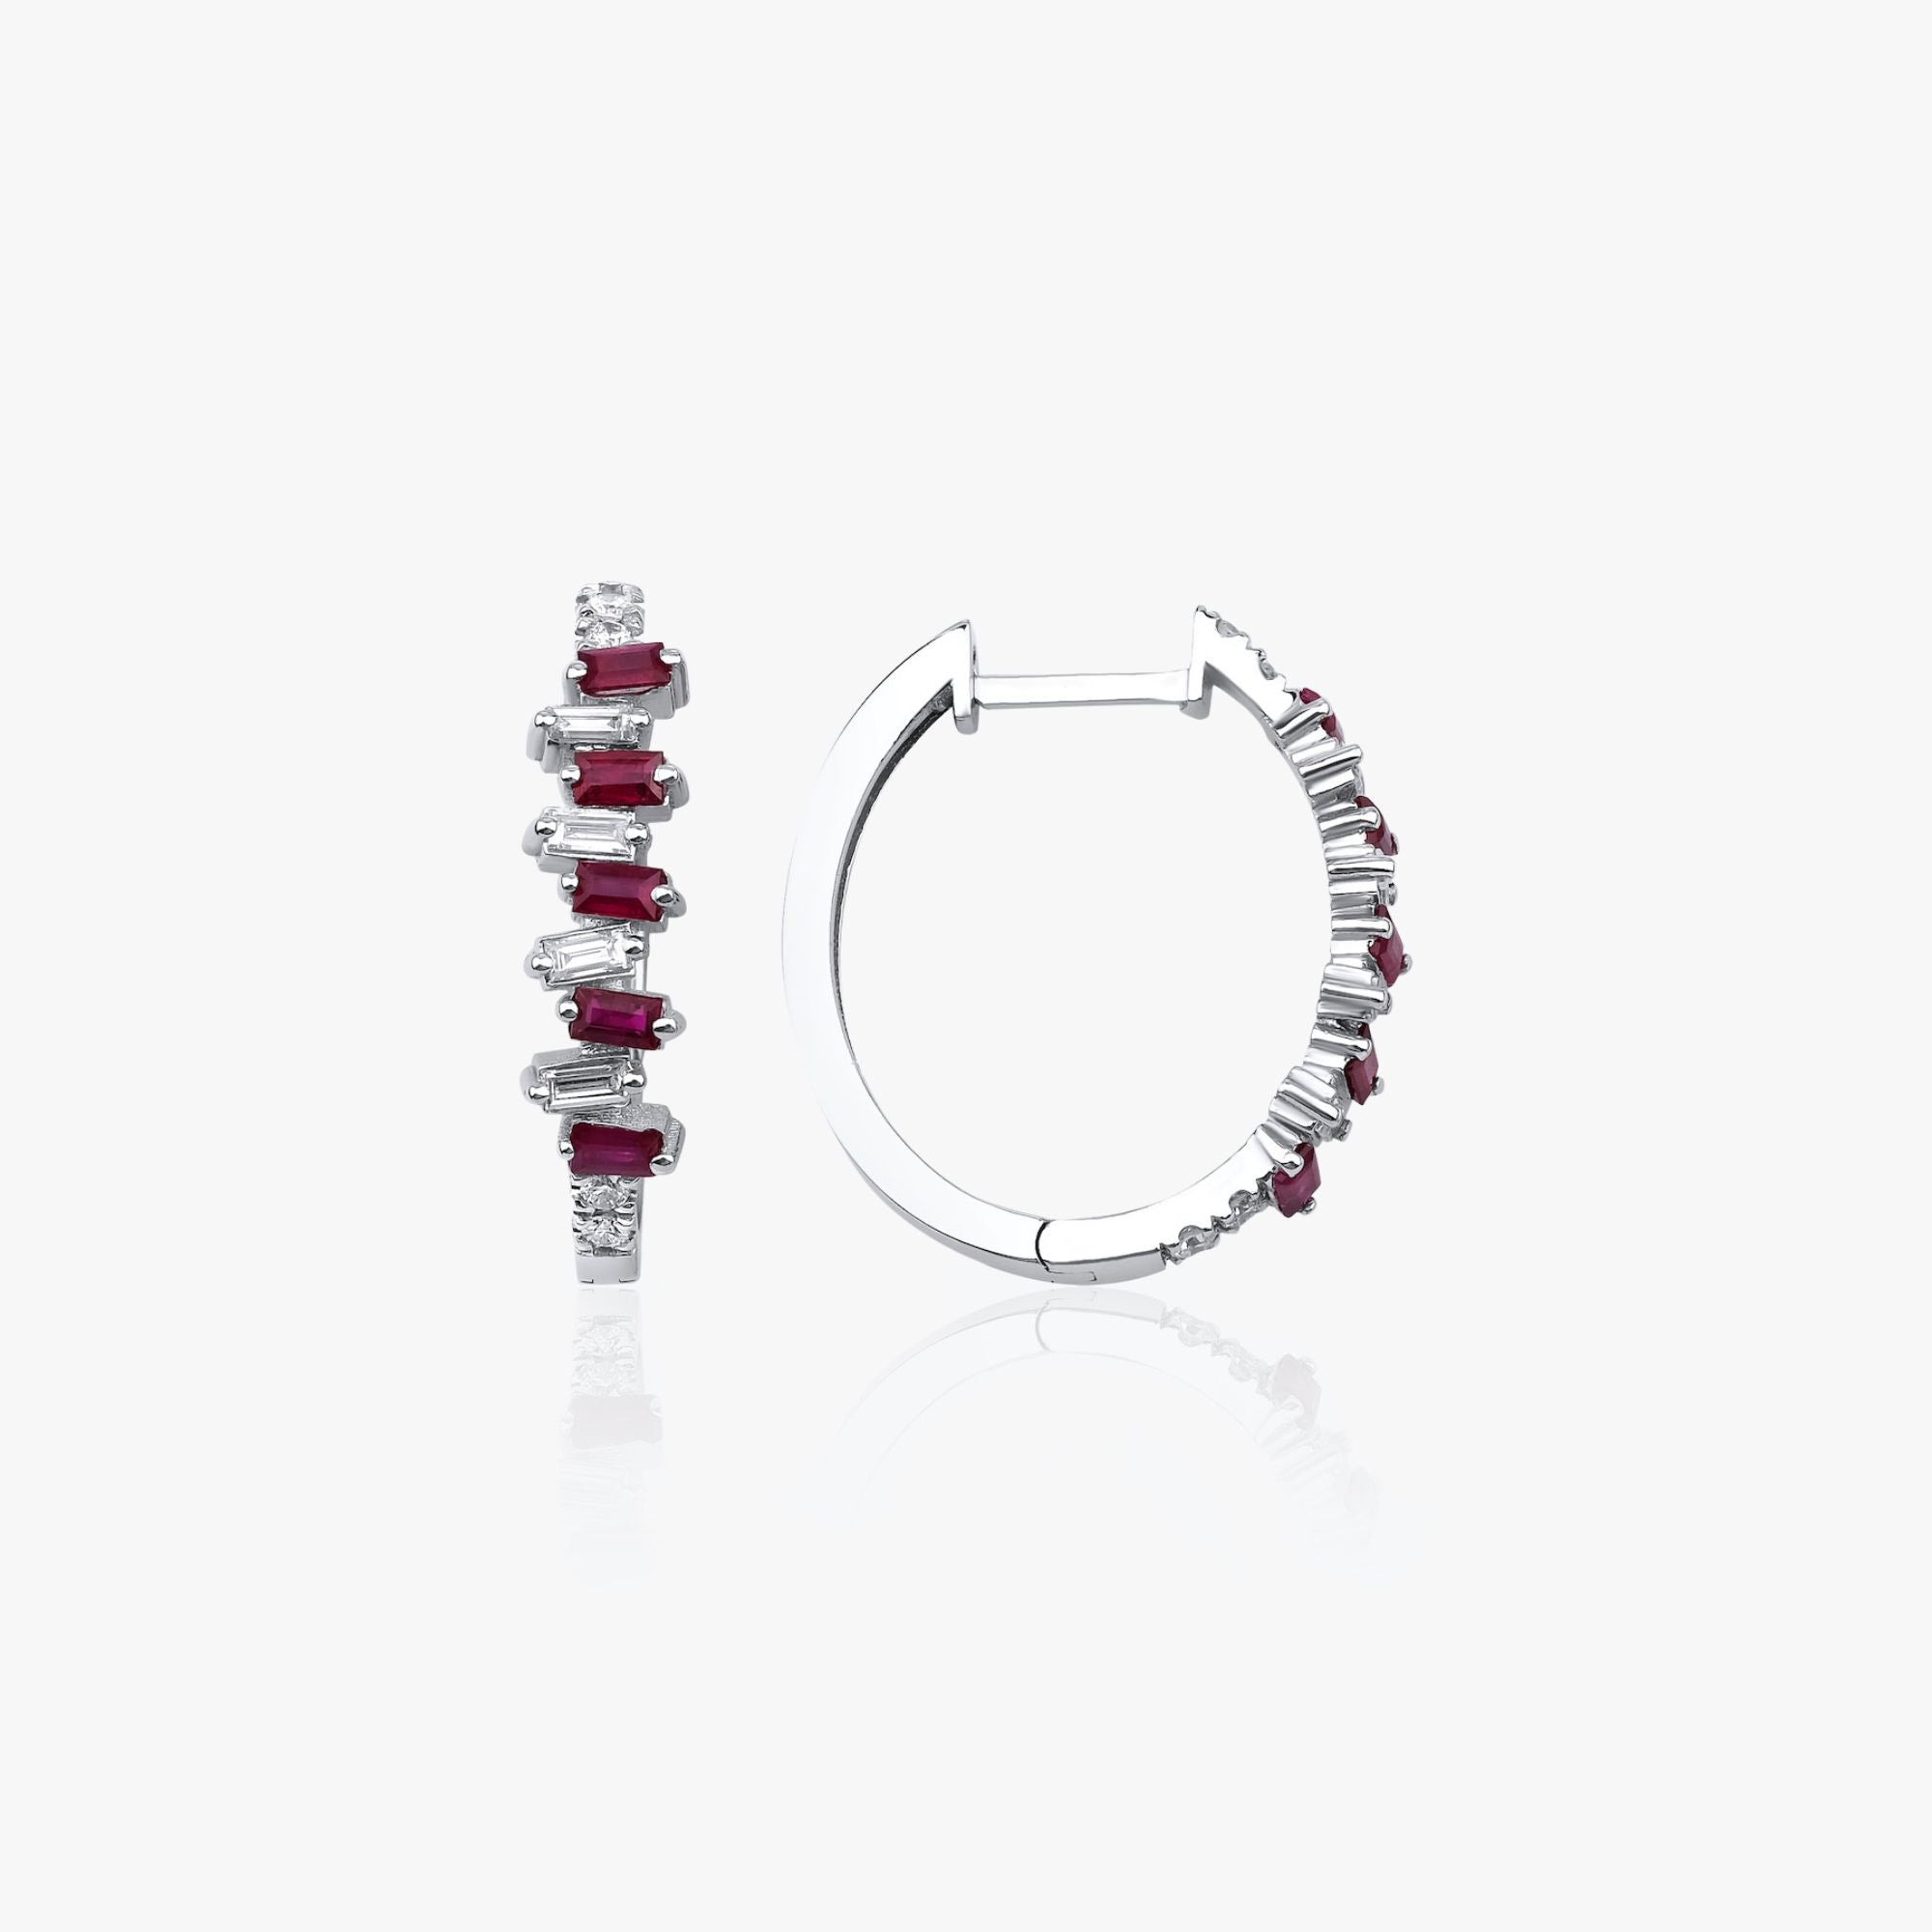 Baguette Cut Ruby and Diamond Hoop Earrings Available in 14K and 18K Gold